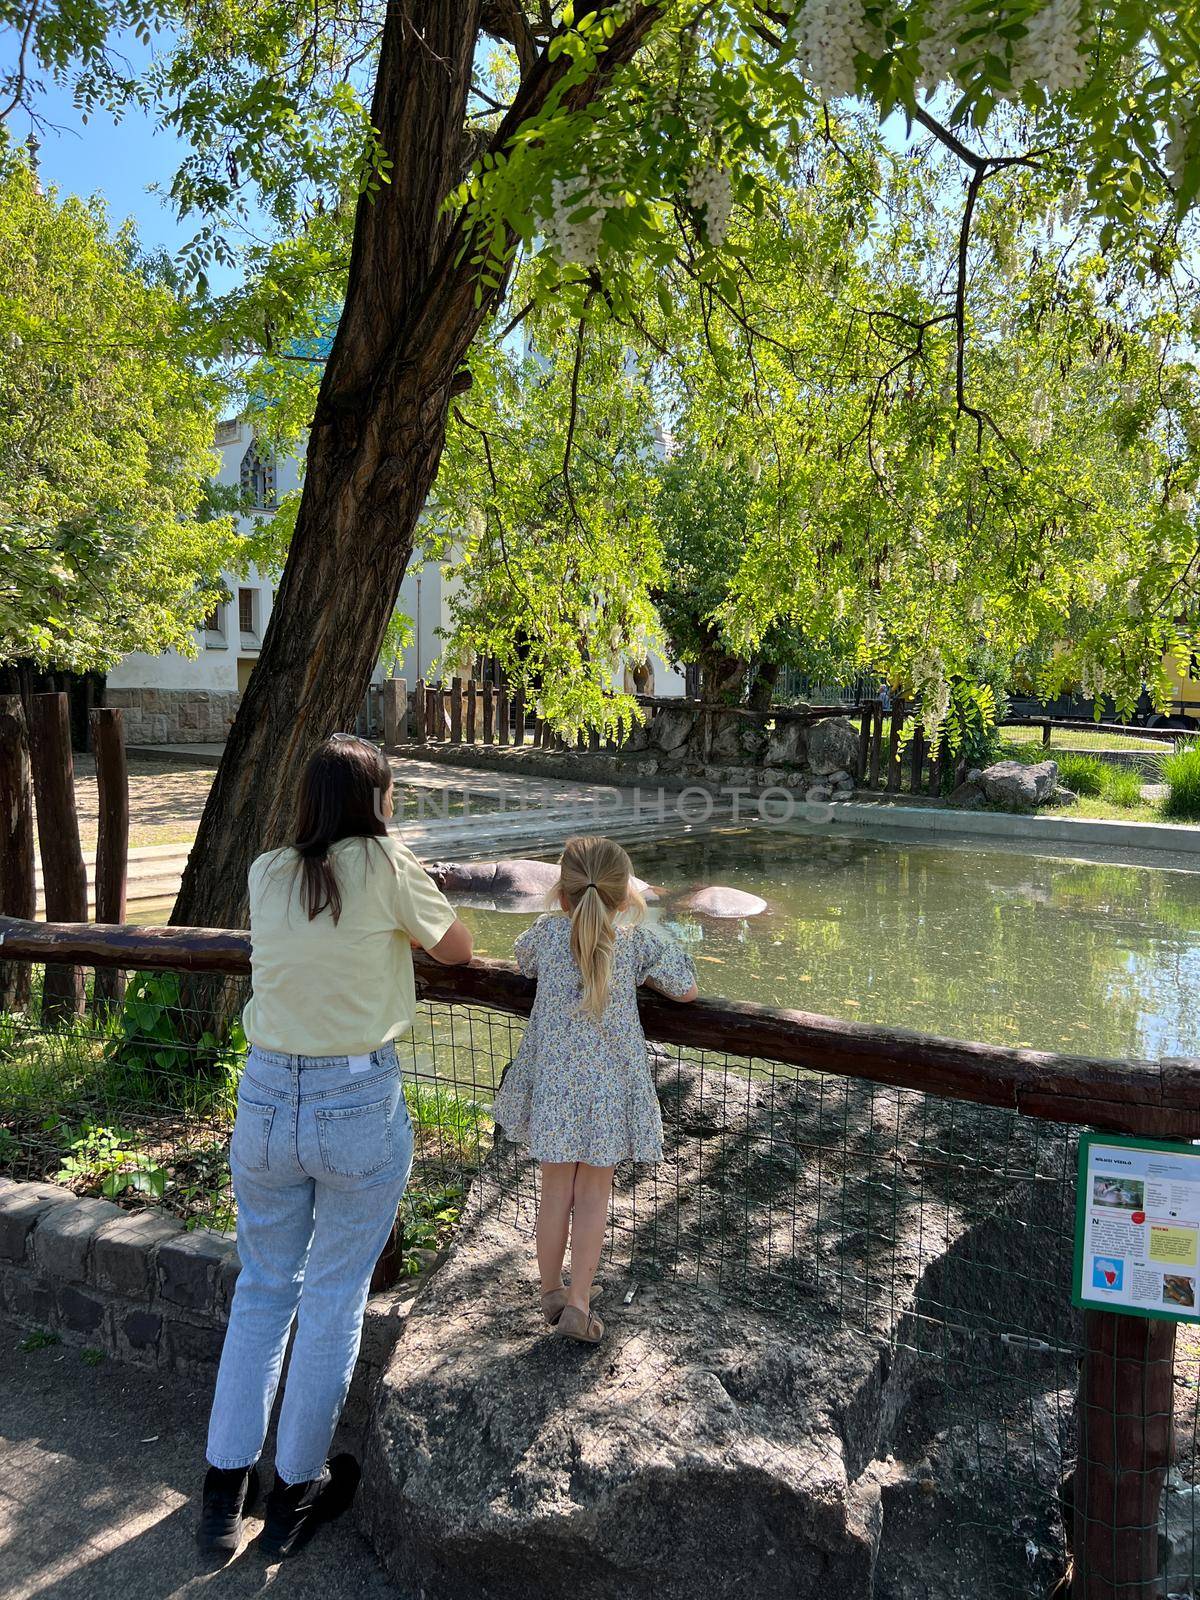 Mom and daughter look at hippos in the pond in the park. High quality photo